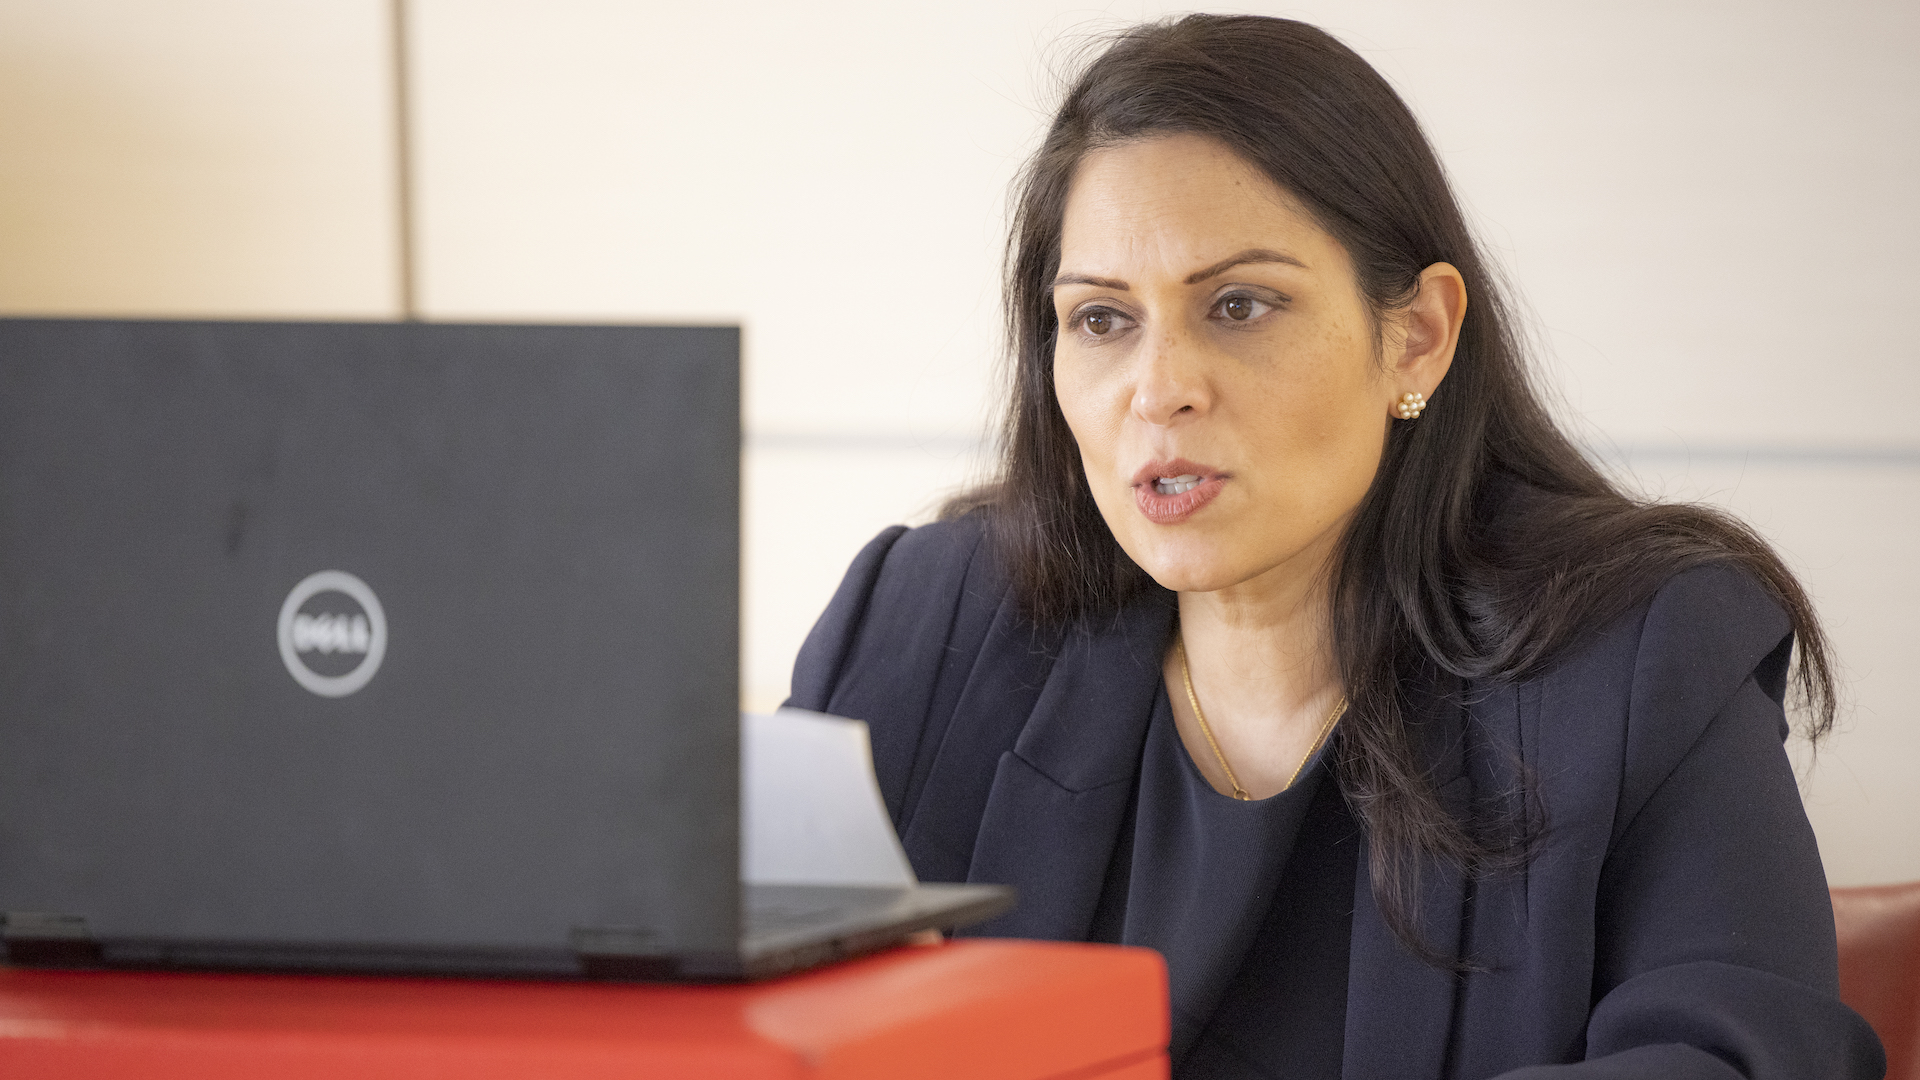 Priti Patel said the scheme would accept 20,000 people from Afghanistan.